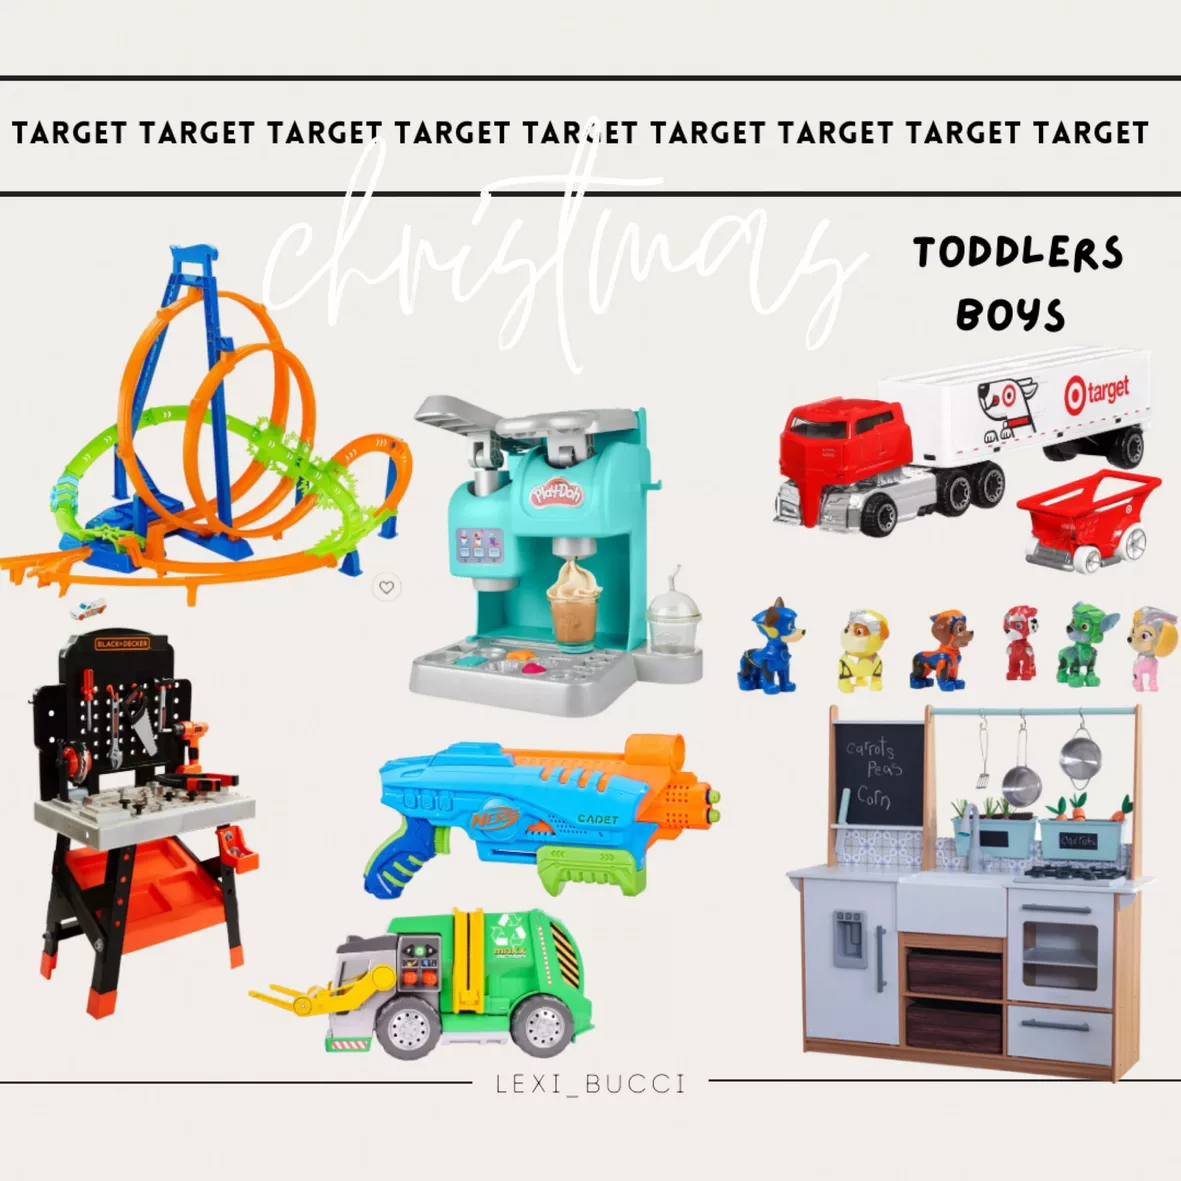 Target ideas for holiday shopping - BLACK+DECKER Junior Ready To Build  Workbench